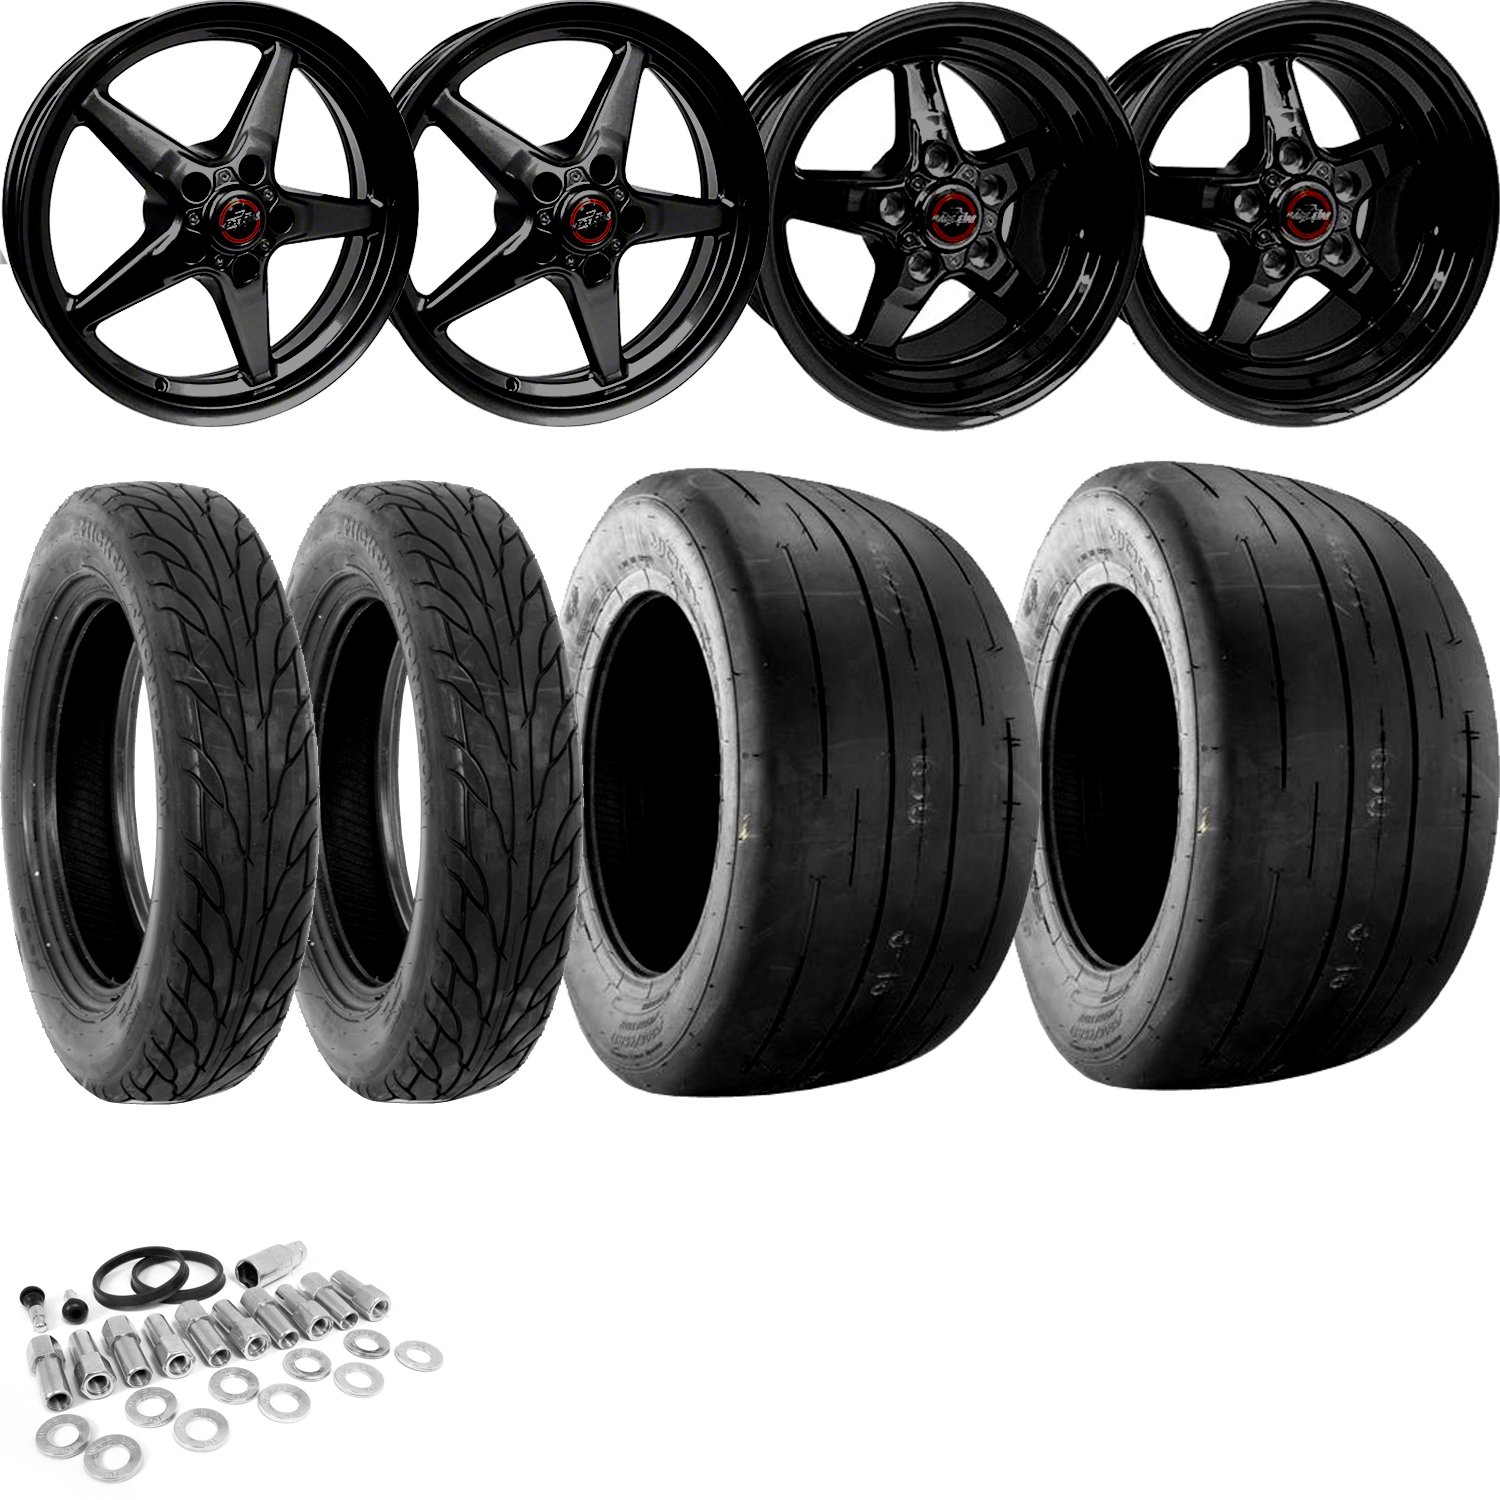 "BIG MEATS" Wheel and Tire Kit For 2006-2019 Dodge Challenger